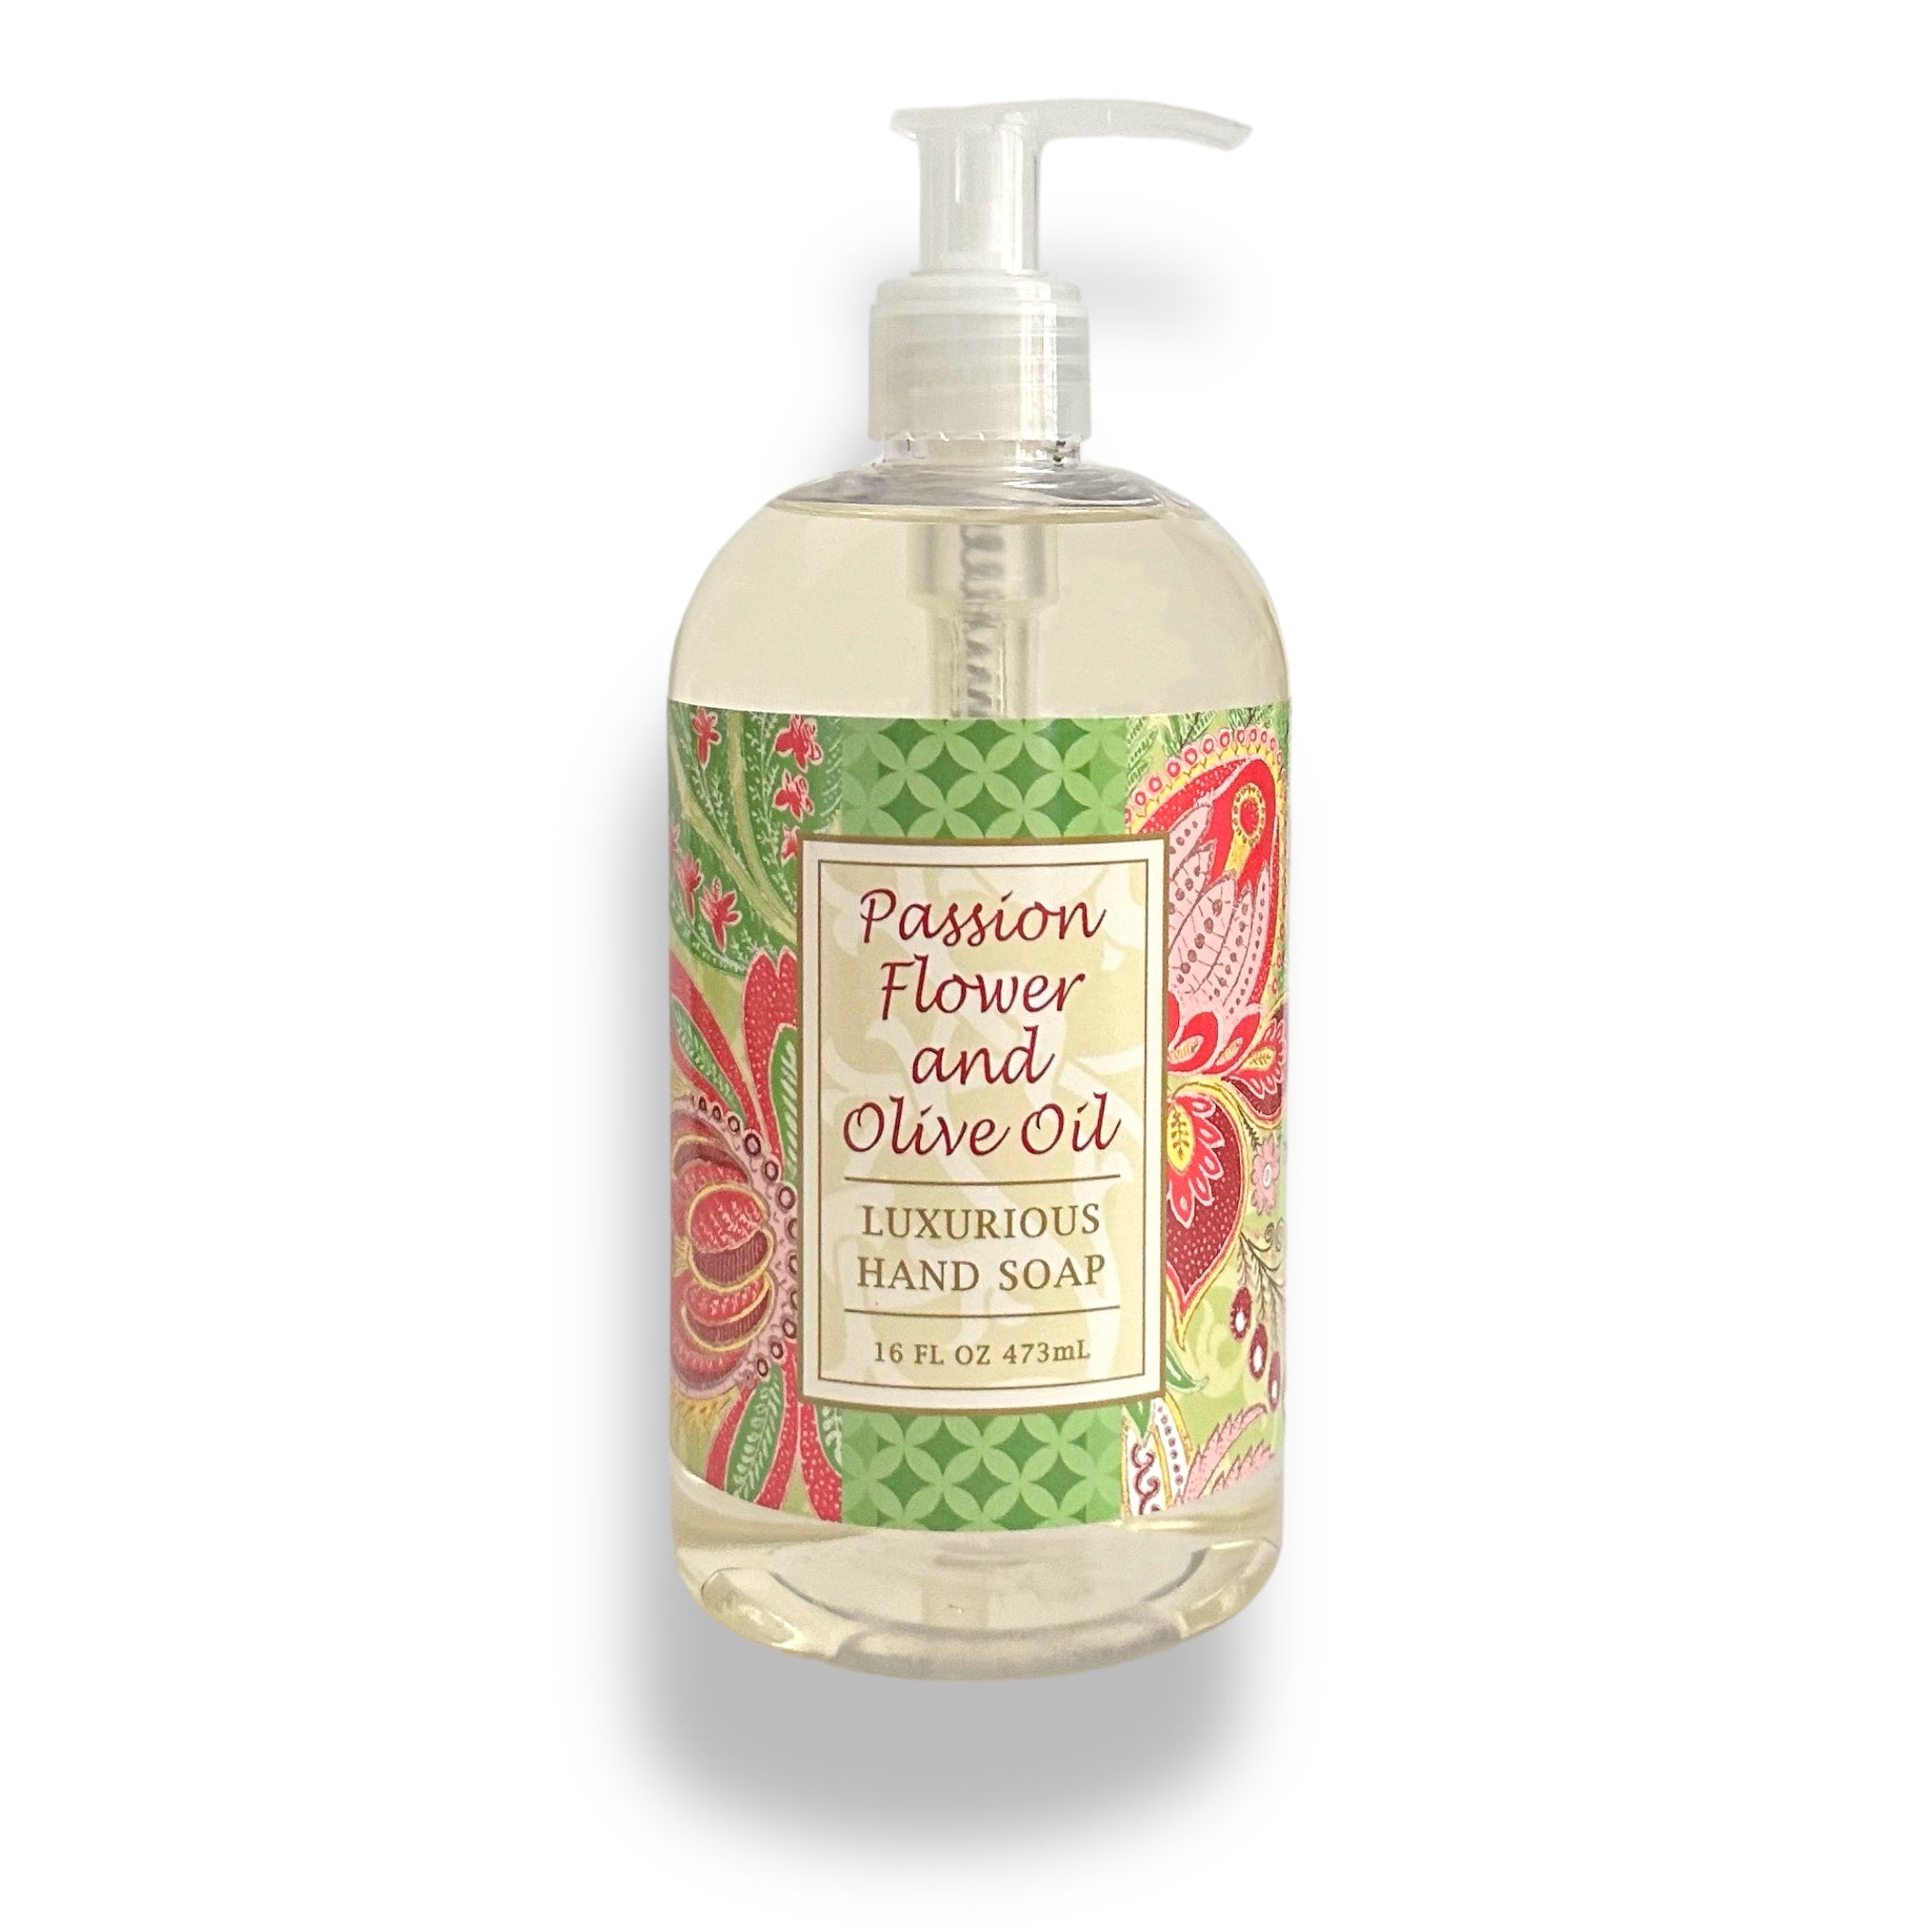 Greenwich Bay Trading Company PASSION FLOWER Hand Soap